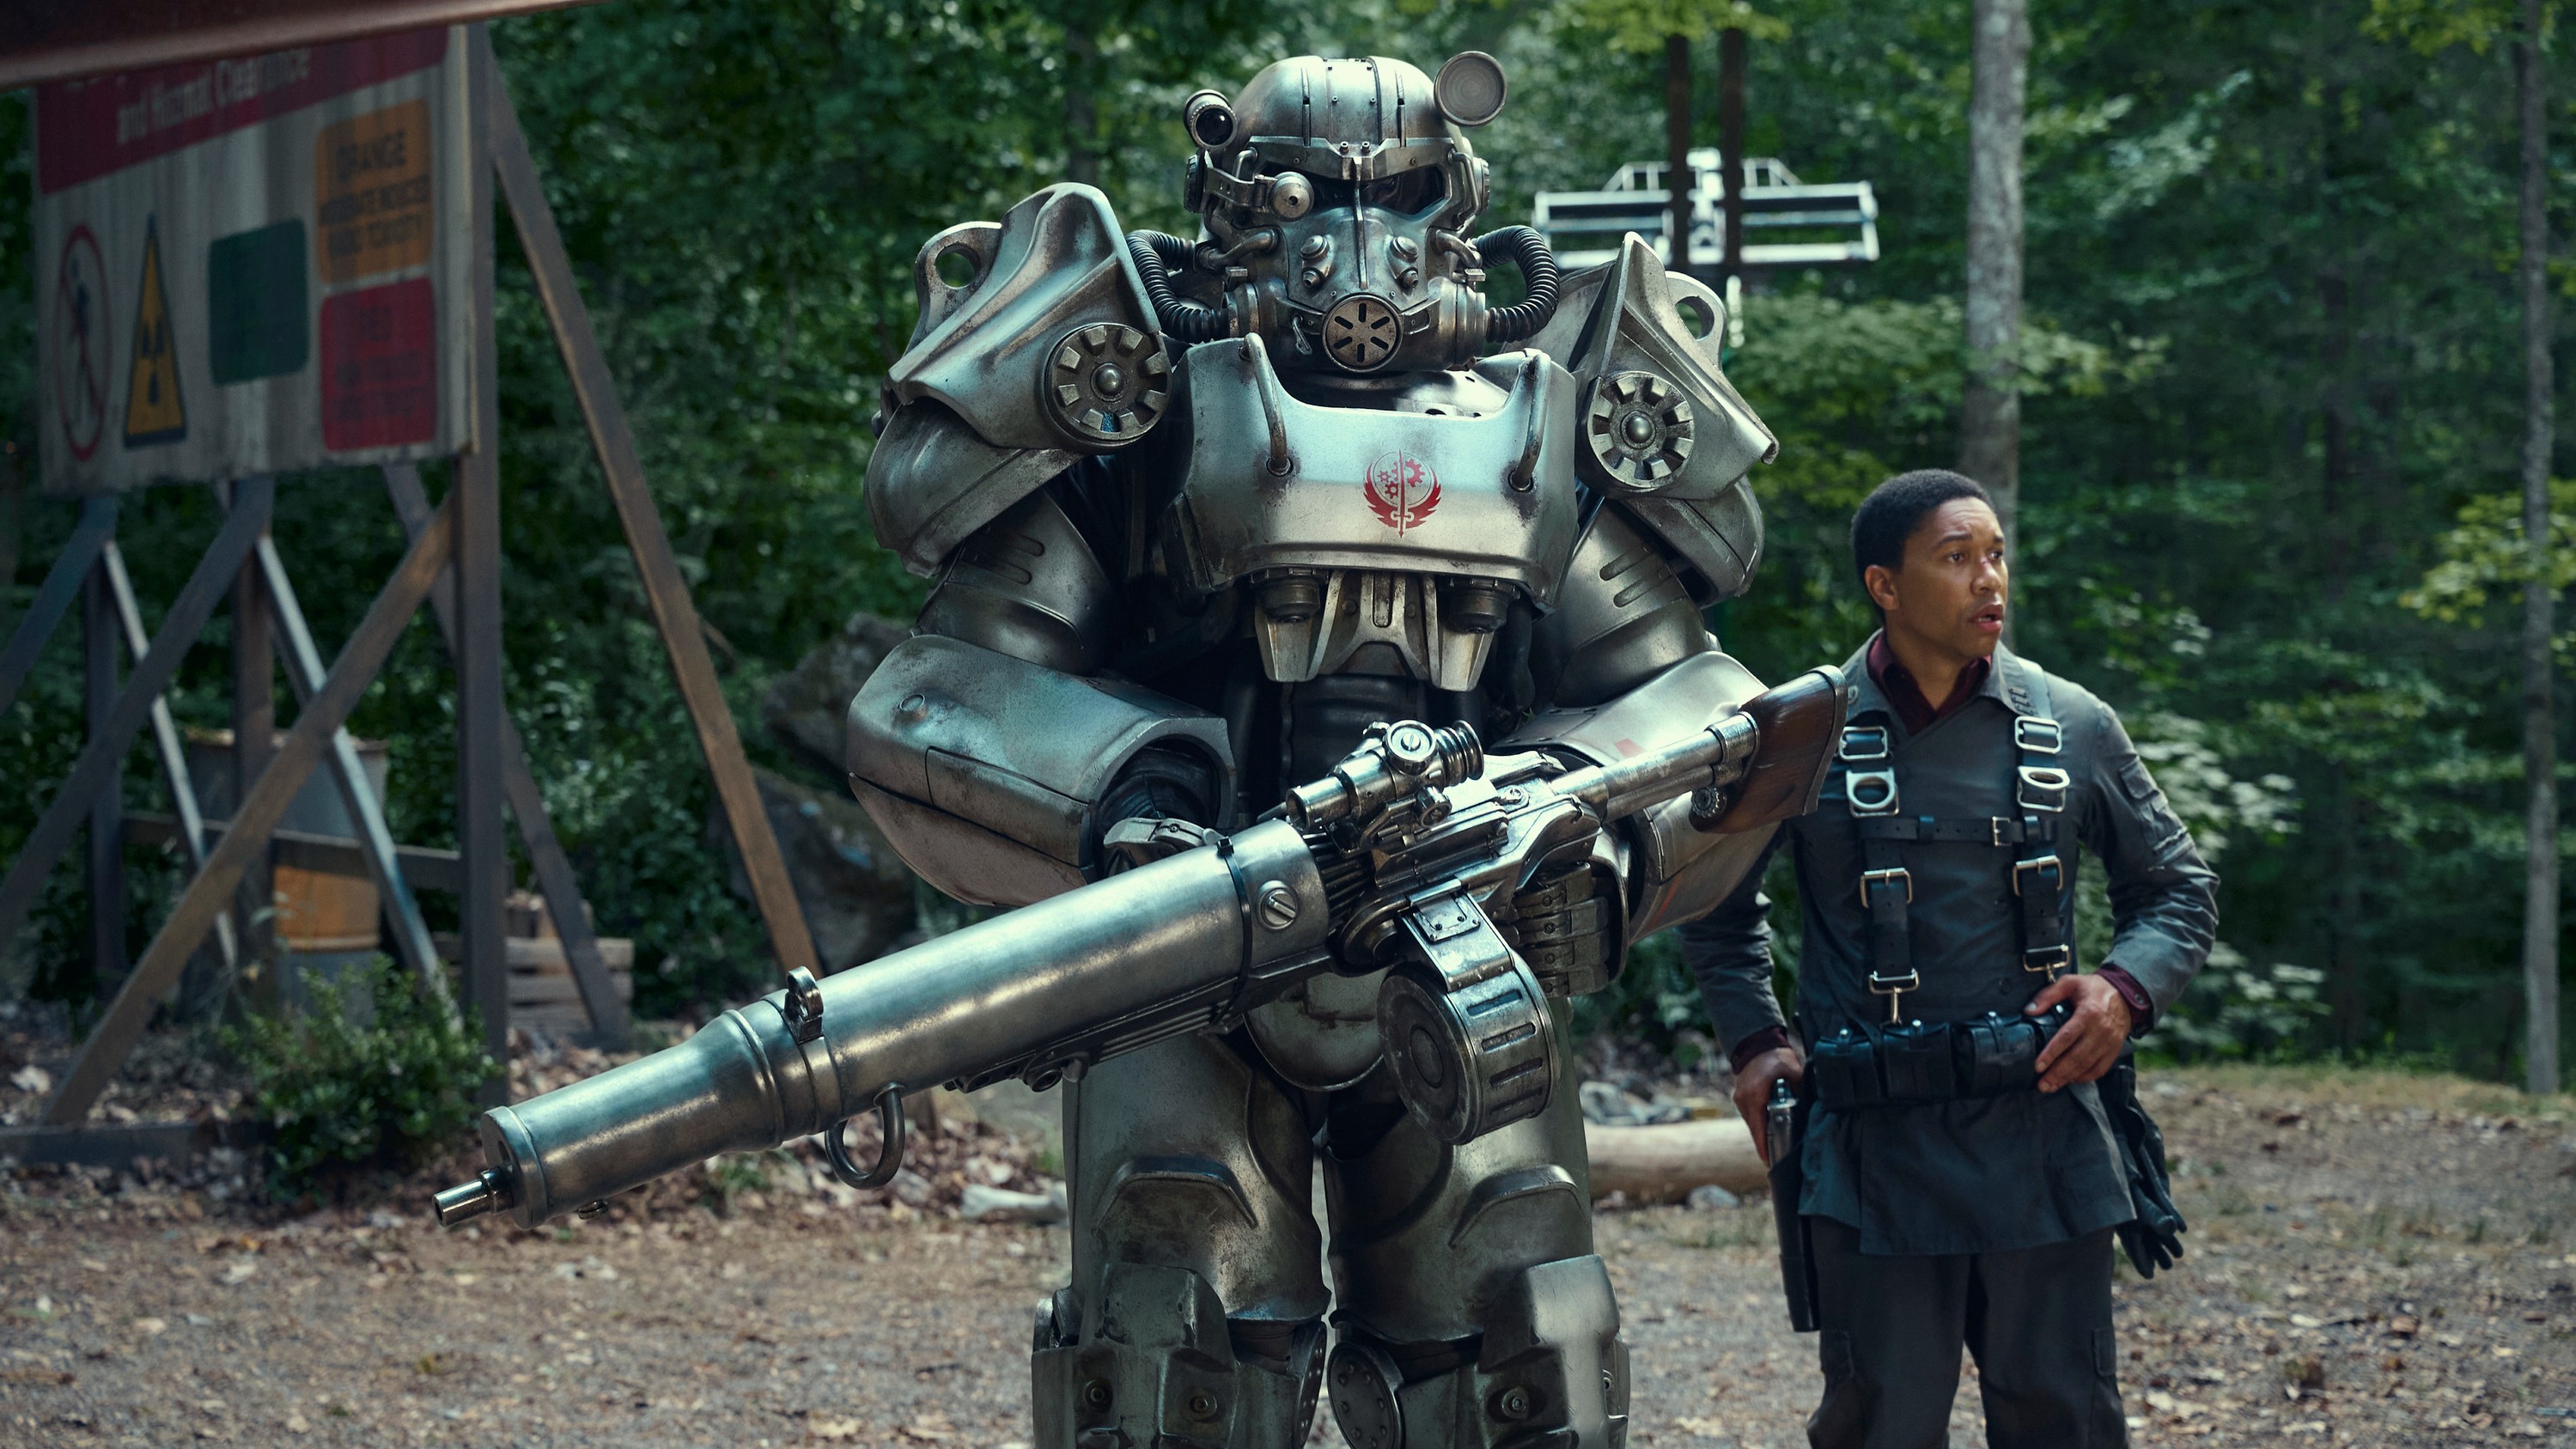 A Brotherhood of Steel warrior in Power Armor with Maximus (Aaron Moten) stood next to it in the Fallout TV show